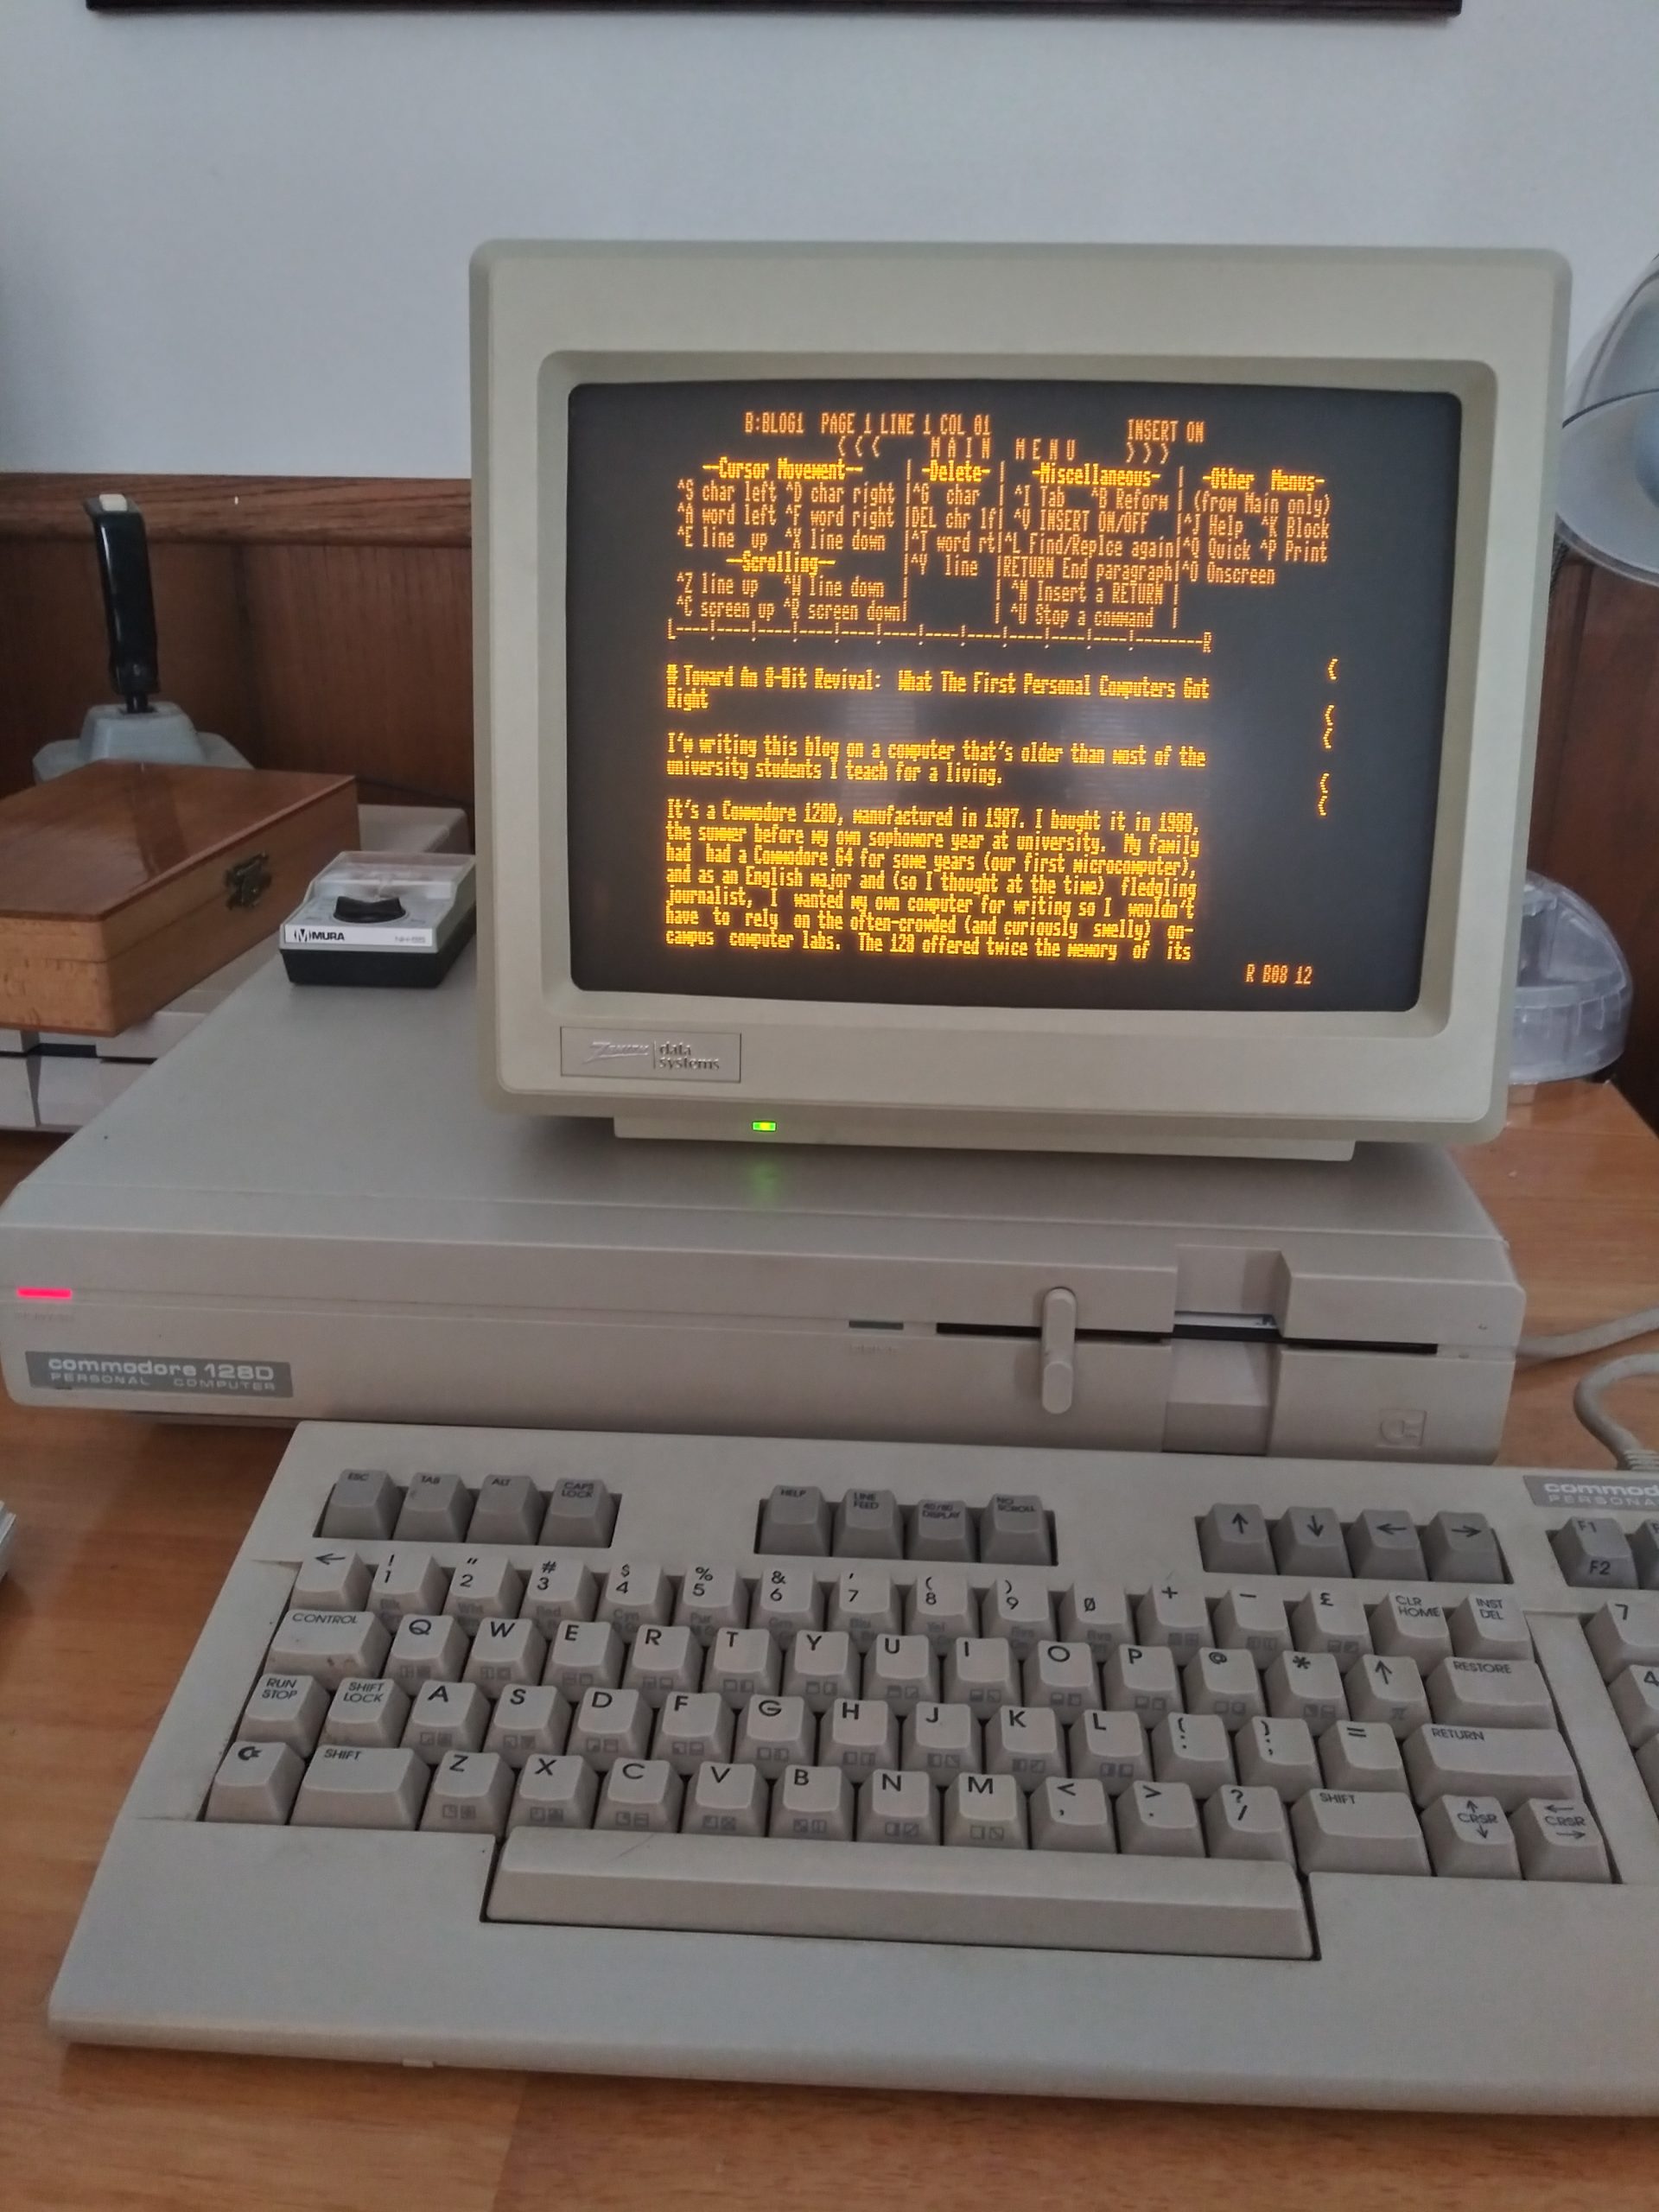 Running CP/M business applications on a Vice emulated Commodore 128